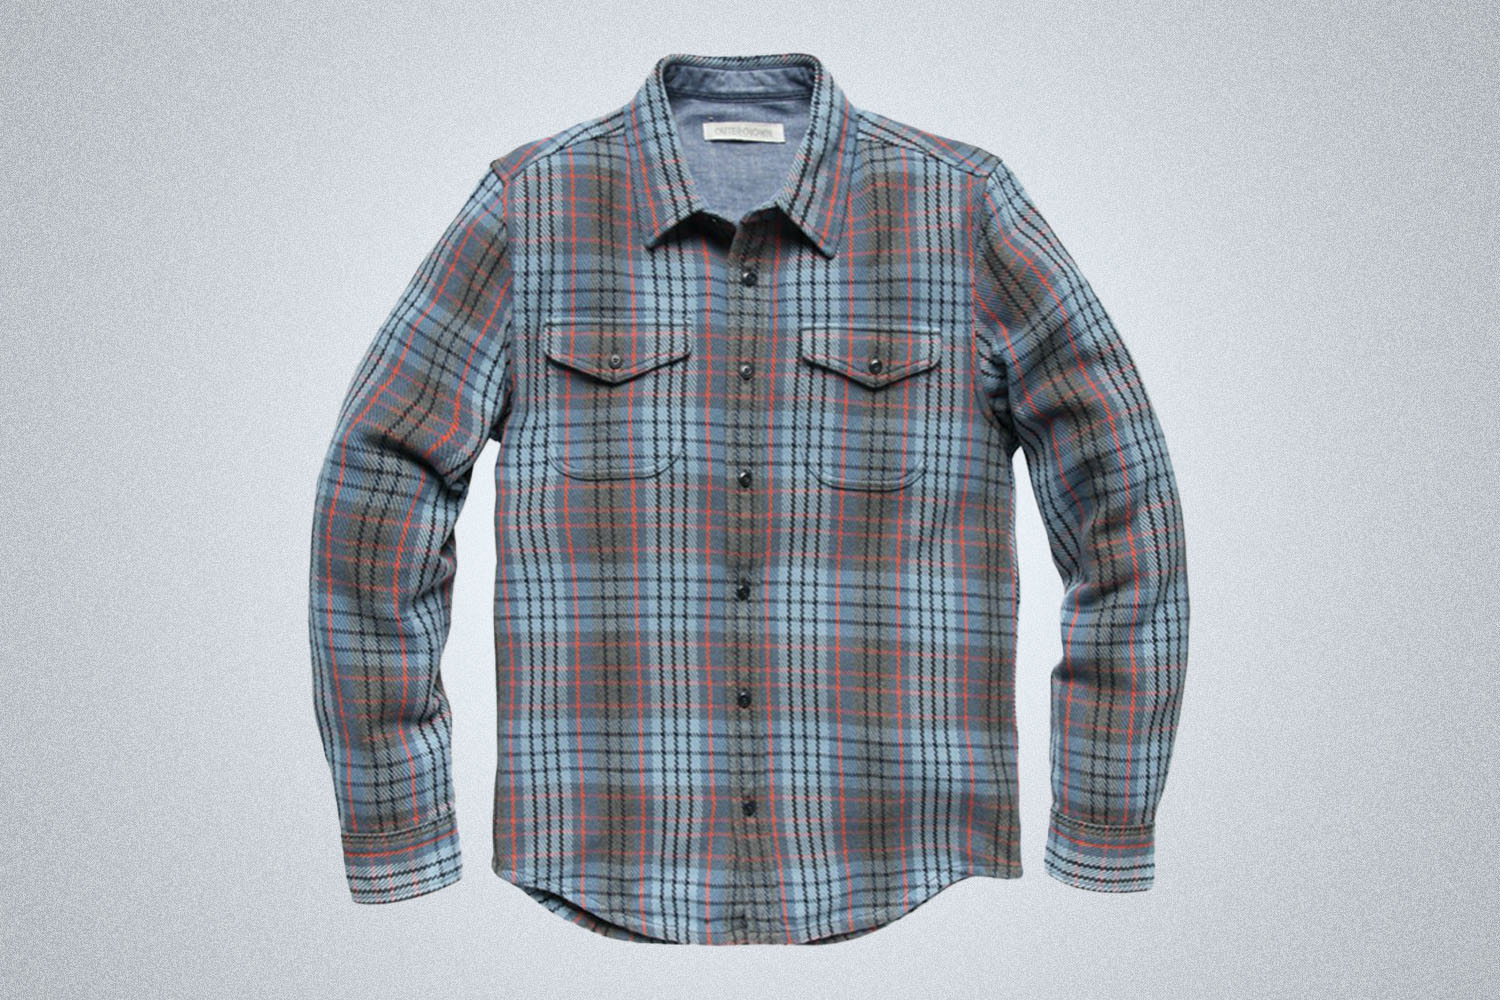 A blue striped shirt jacket from Outerknown on a grey background